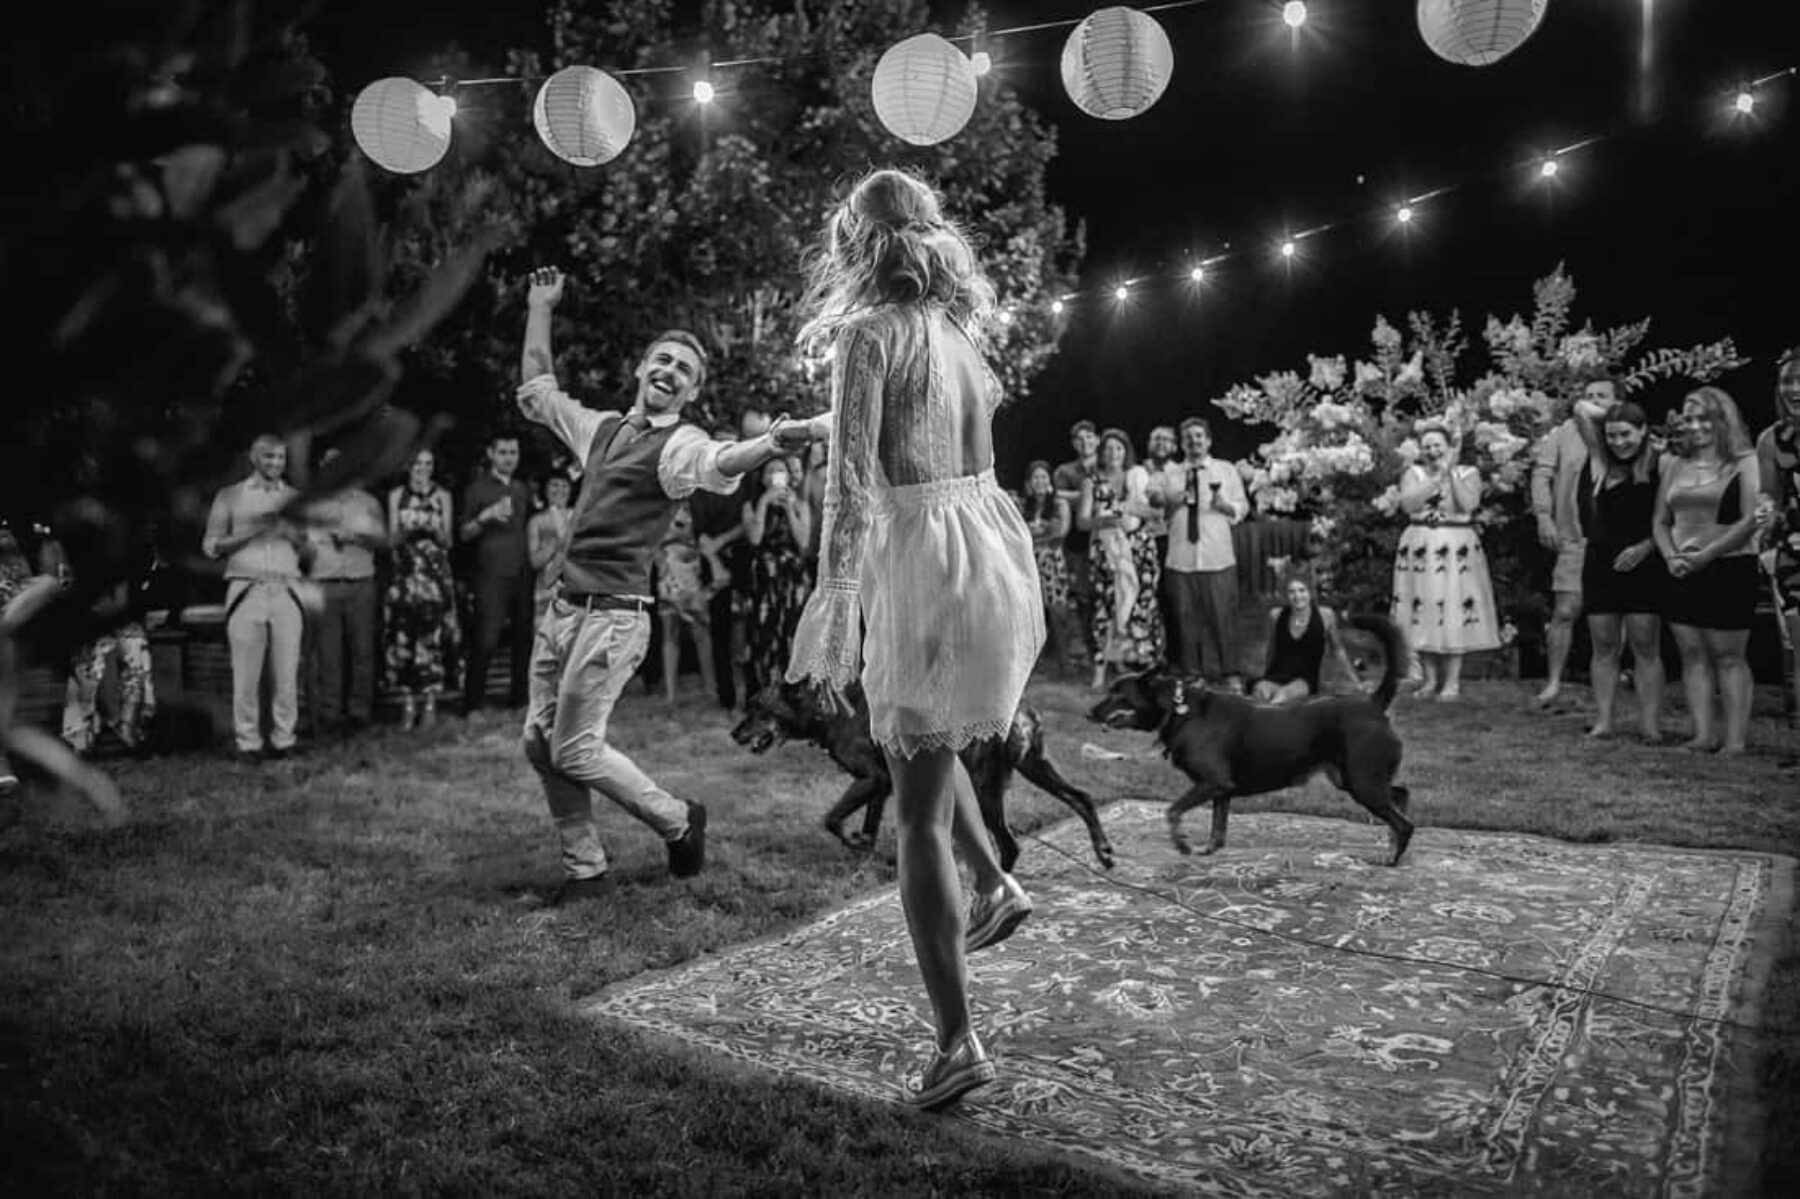 Outback festival wedding in Bright, Victoria - Photography by Oli Sansom